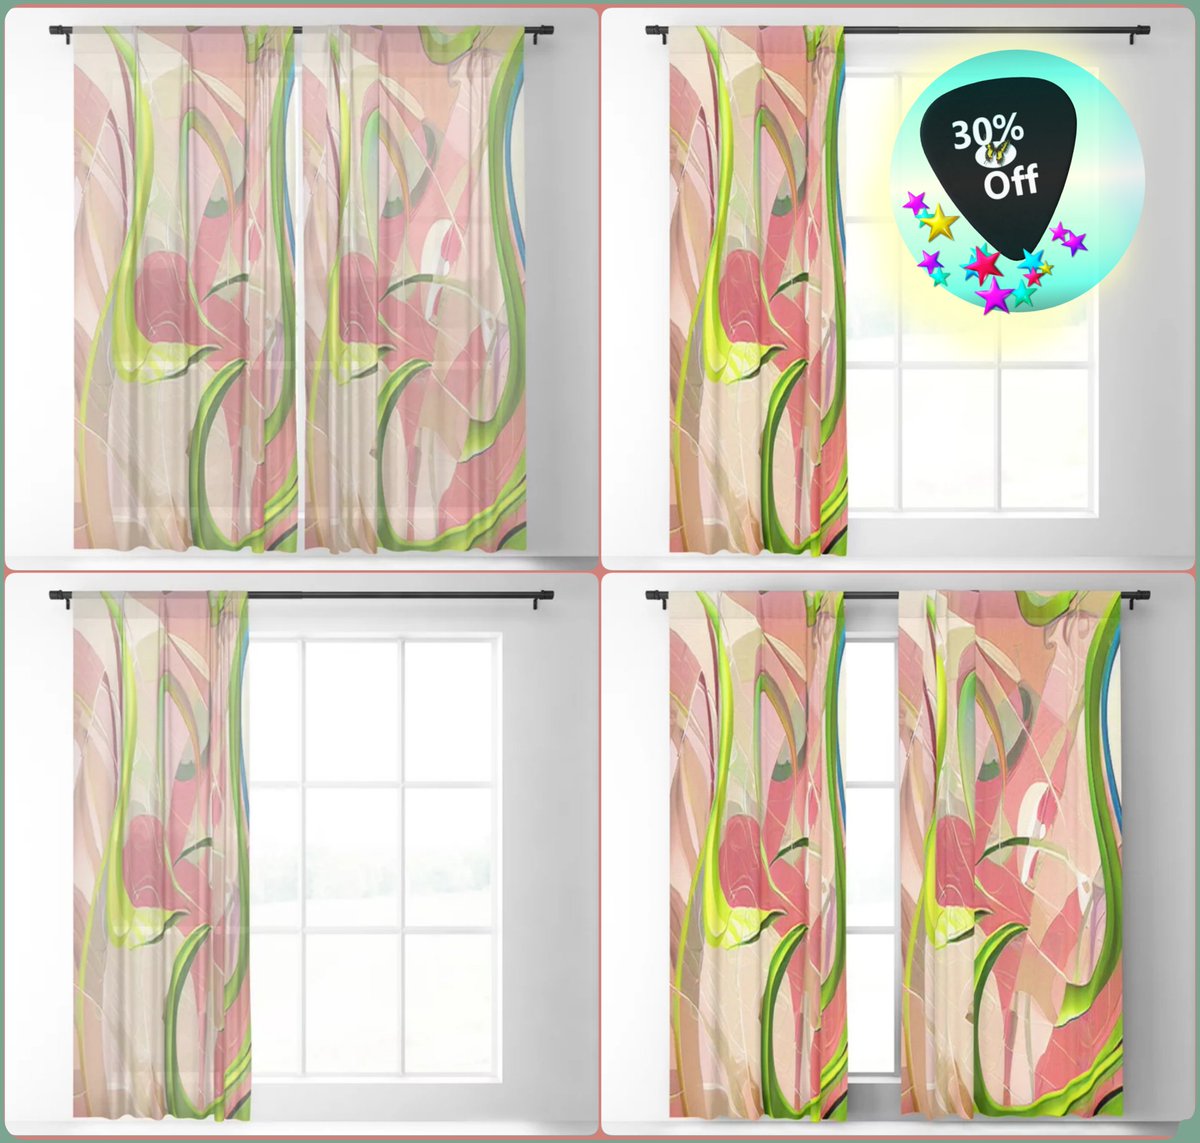 *SALE 30% Off*
Fostering Brilliance Sheer Curtain~by Art Falaxy~
~Exquisite Decor~
#artfalaxy #art #curtains #drapes #homedecor #society6 #Society6max #swirls #accents #sheercurtains #blackoutcurtains #floorrugs

society6.com/product/foster…

society6.com/product/foster…